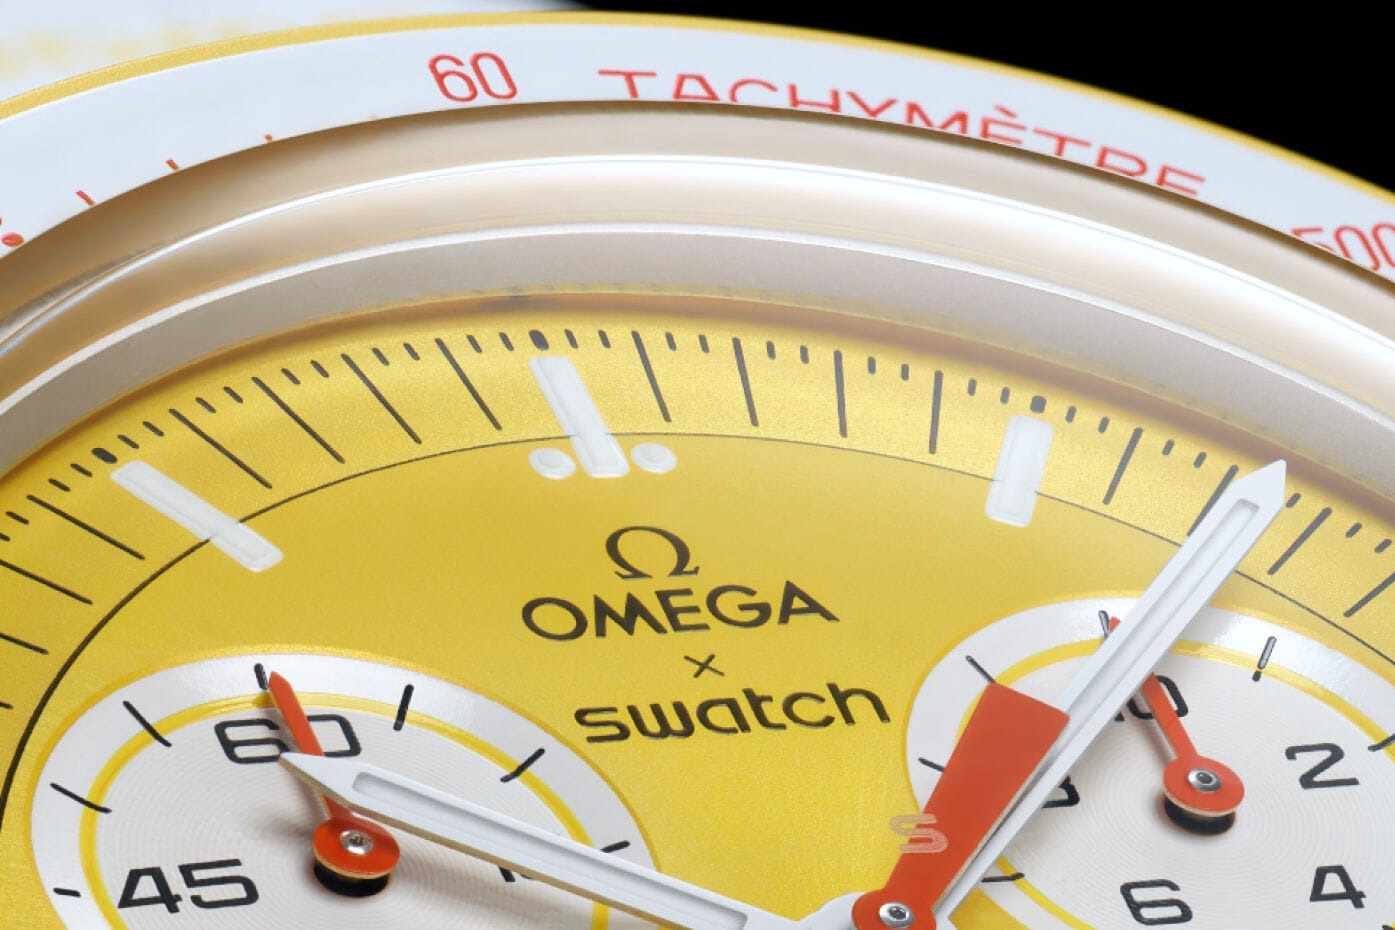 Swatch x OMEGA Moonswatch watch in white and yellow color